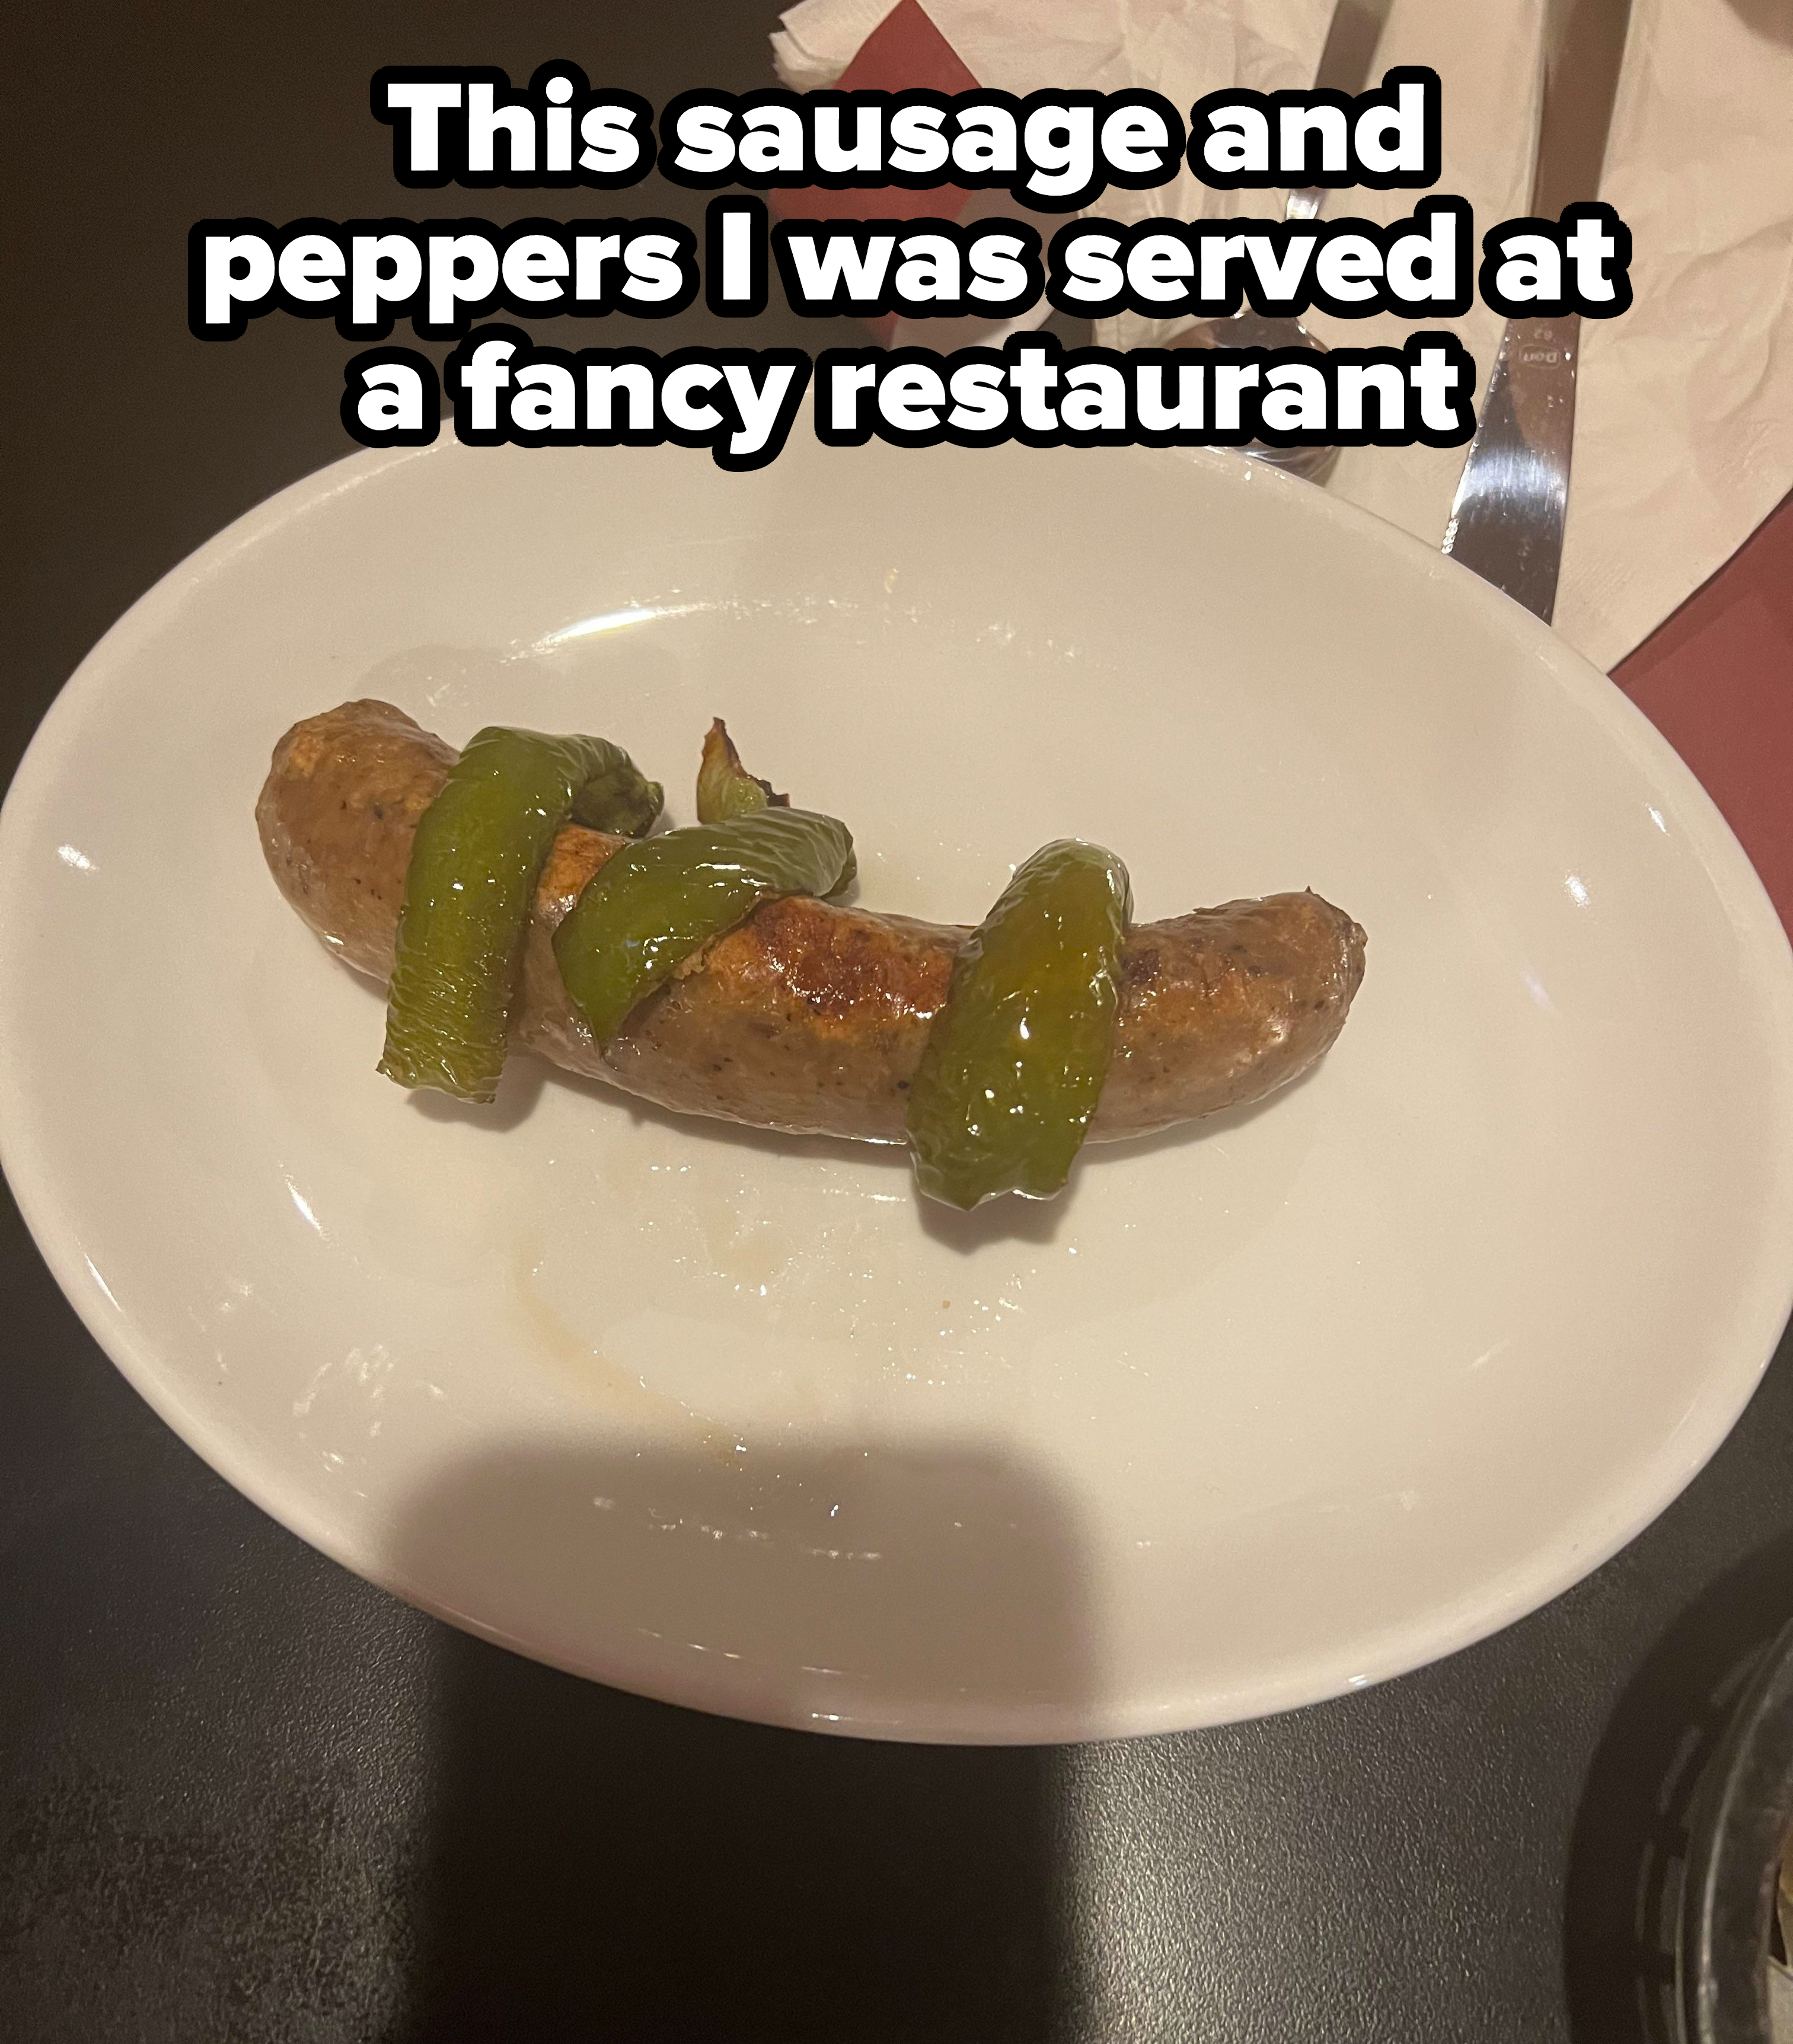 A piece of sausage with three green peppers on top